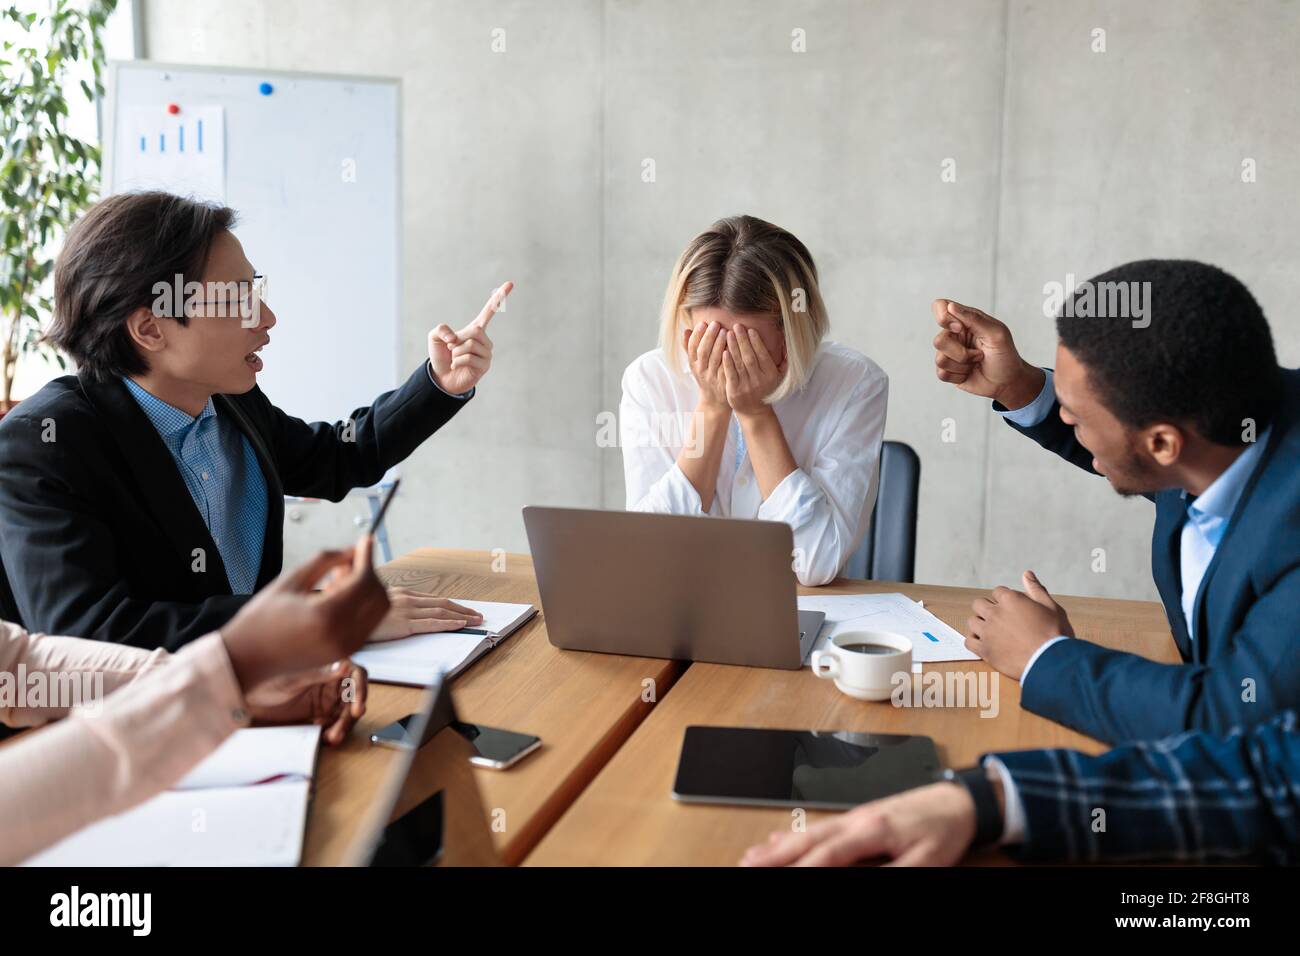 Colleagues Shouting At Unhappy Victimized Businesswoman Sitting In Modern Office Stock Photo